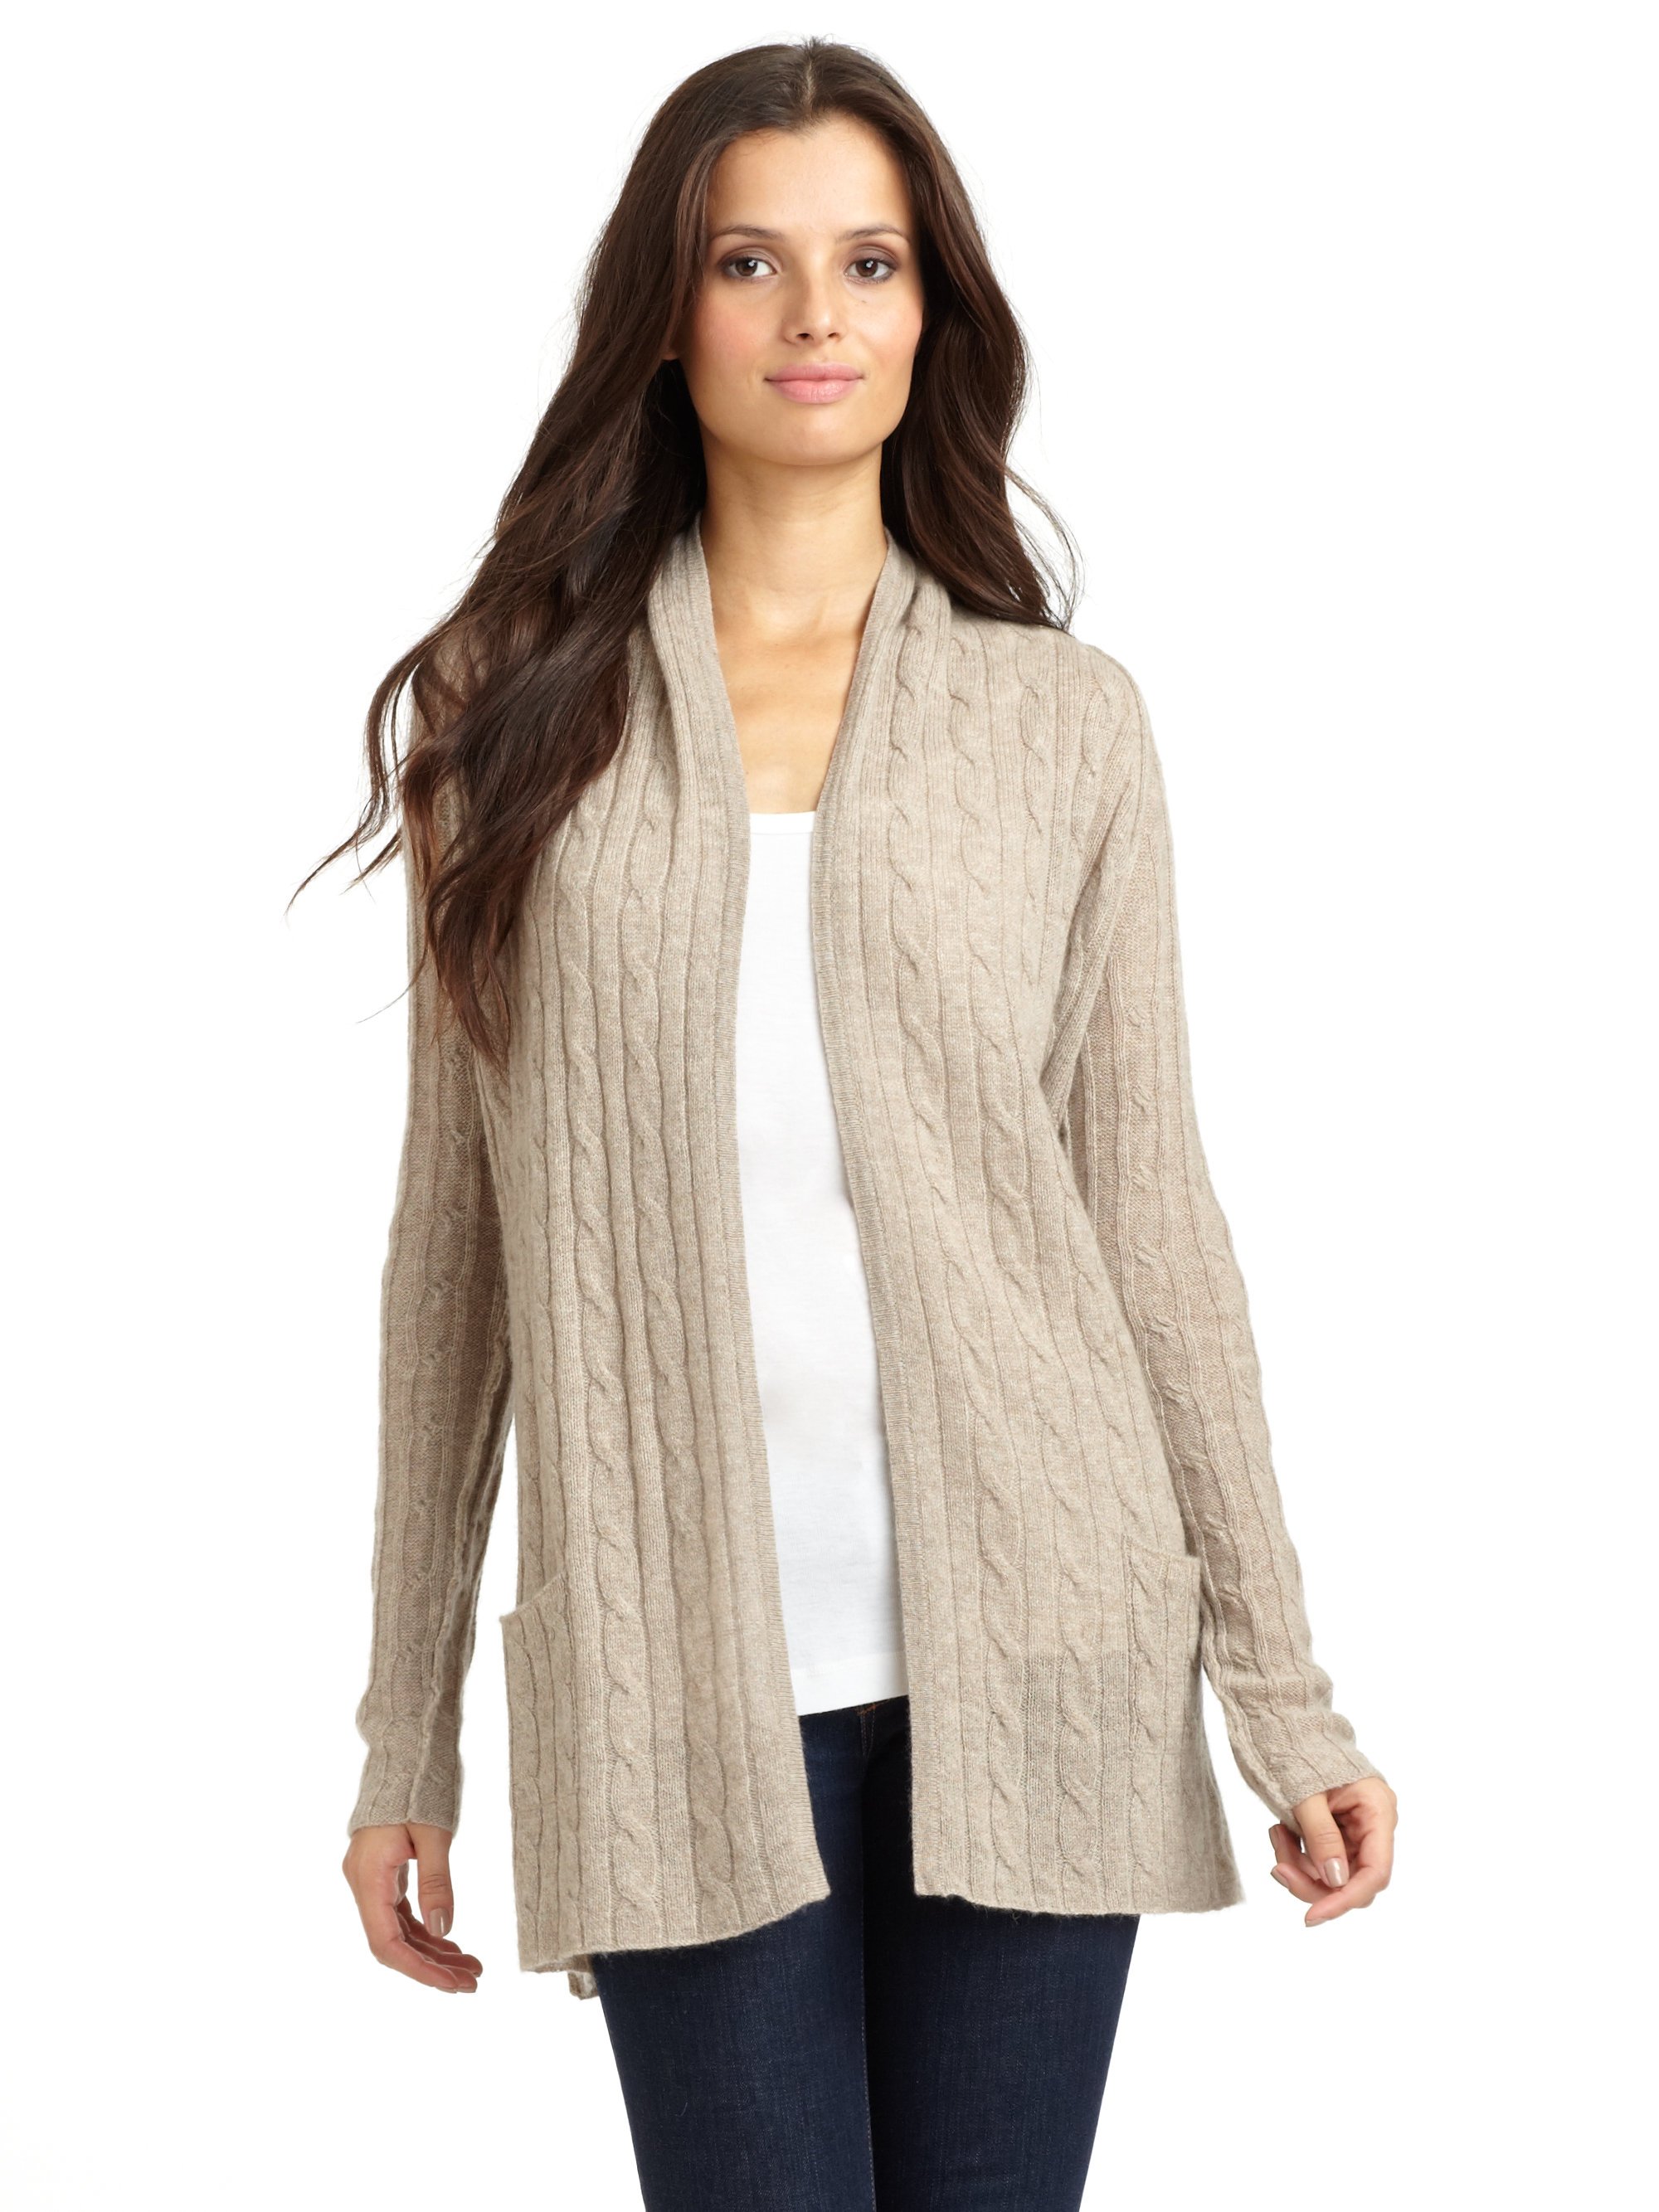 Lyst - Kokun Cashmere Cable Knit Cardigan in Natural